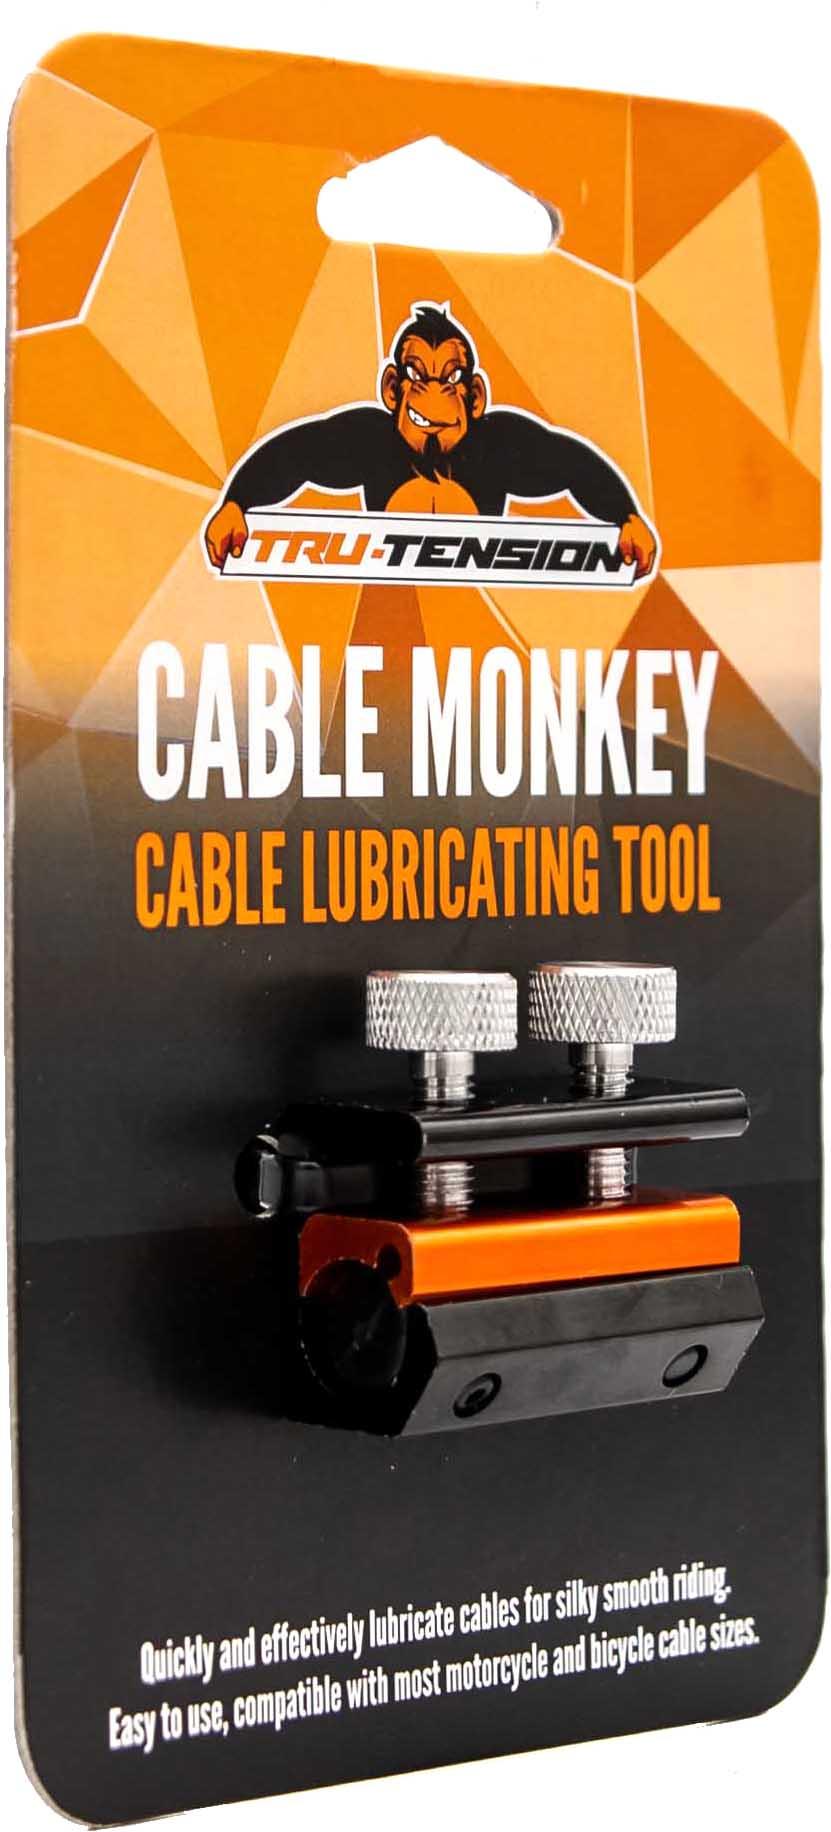 Tru-Tension Cable Monkey - Motorcycle Cable Lubricator